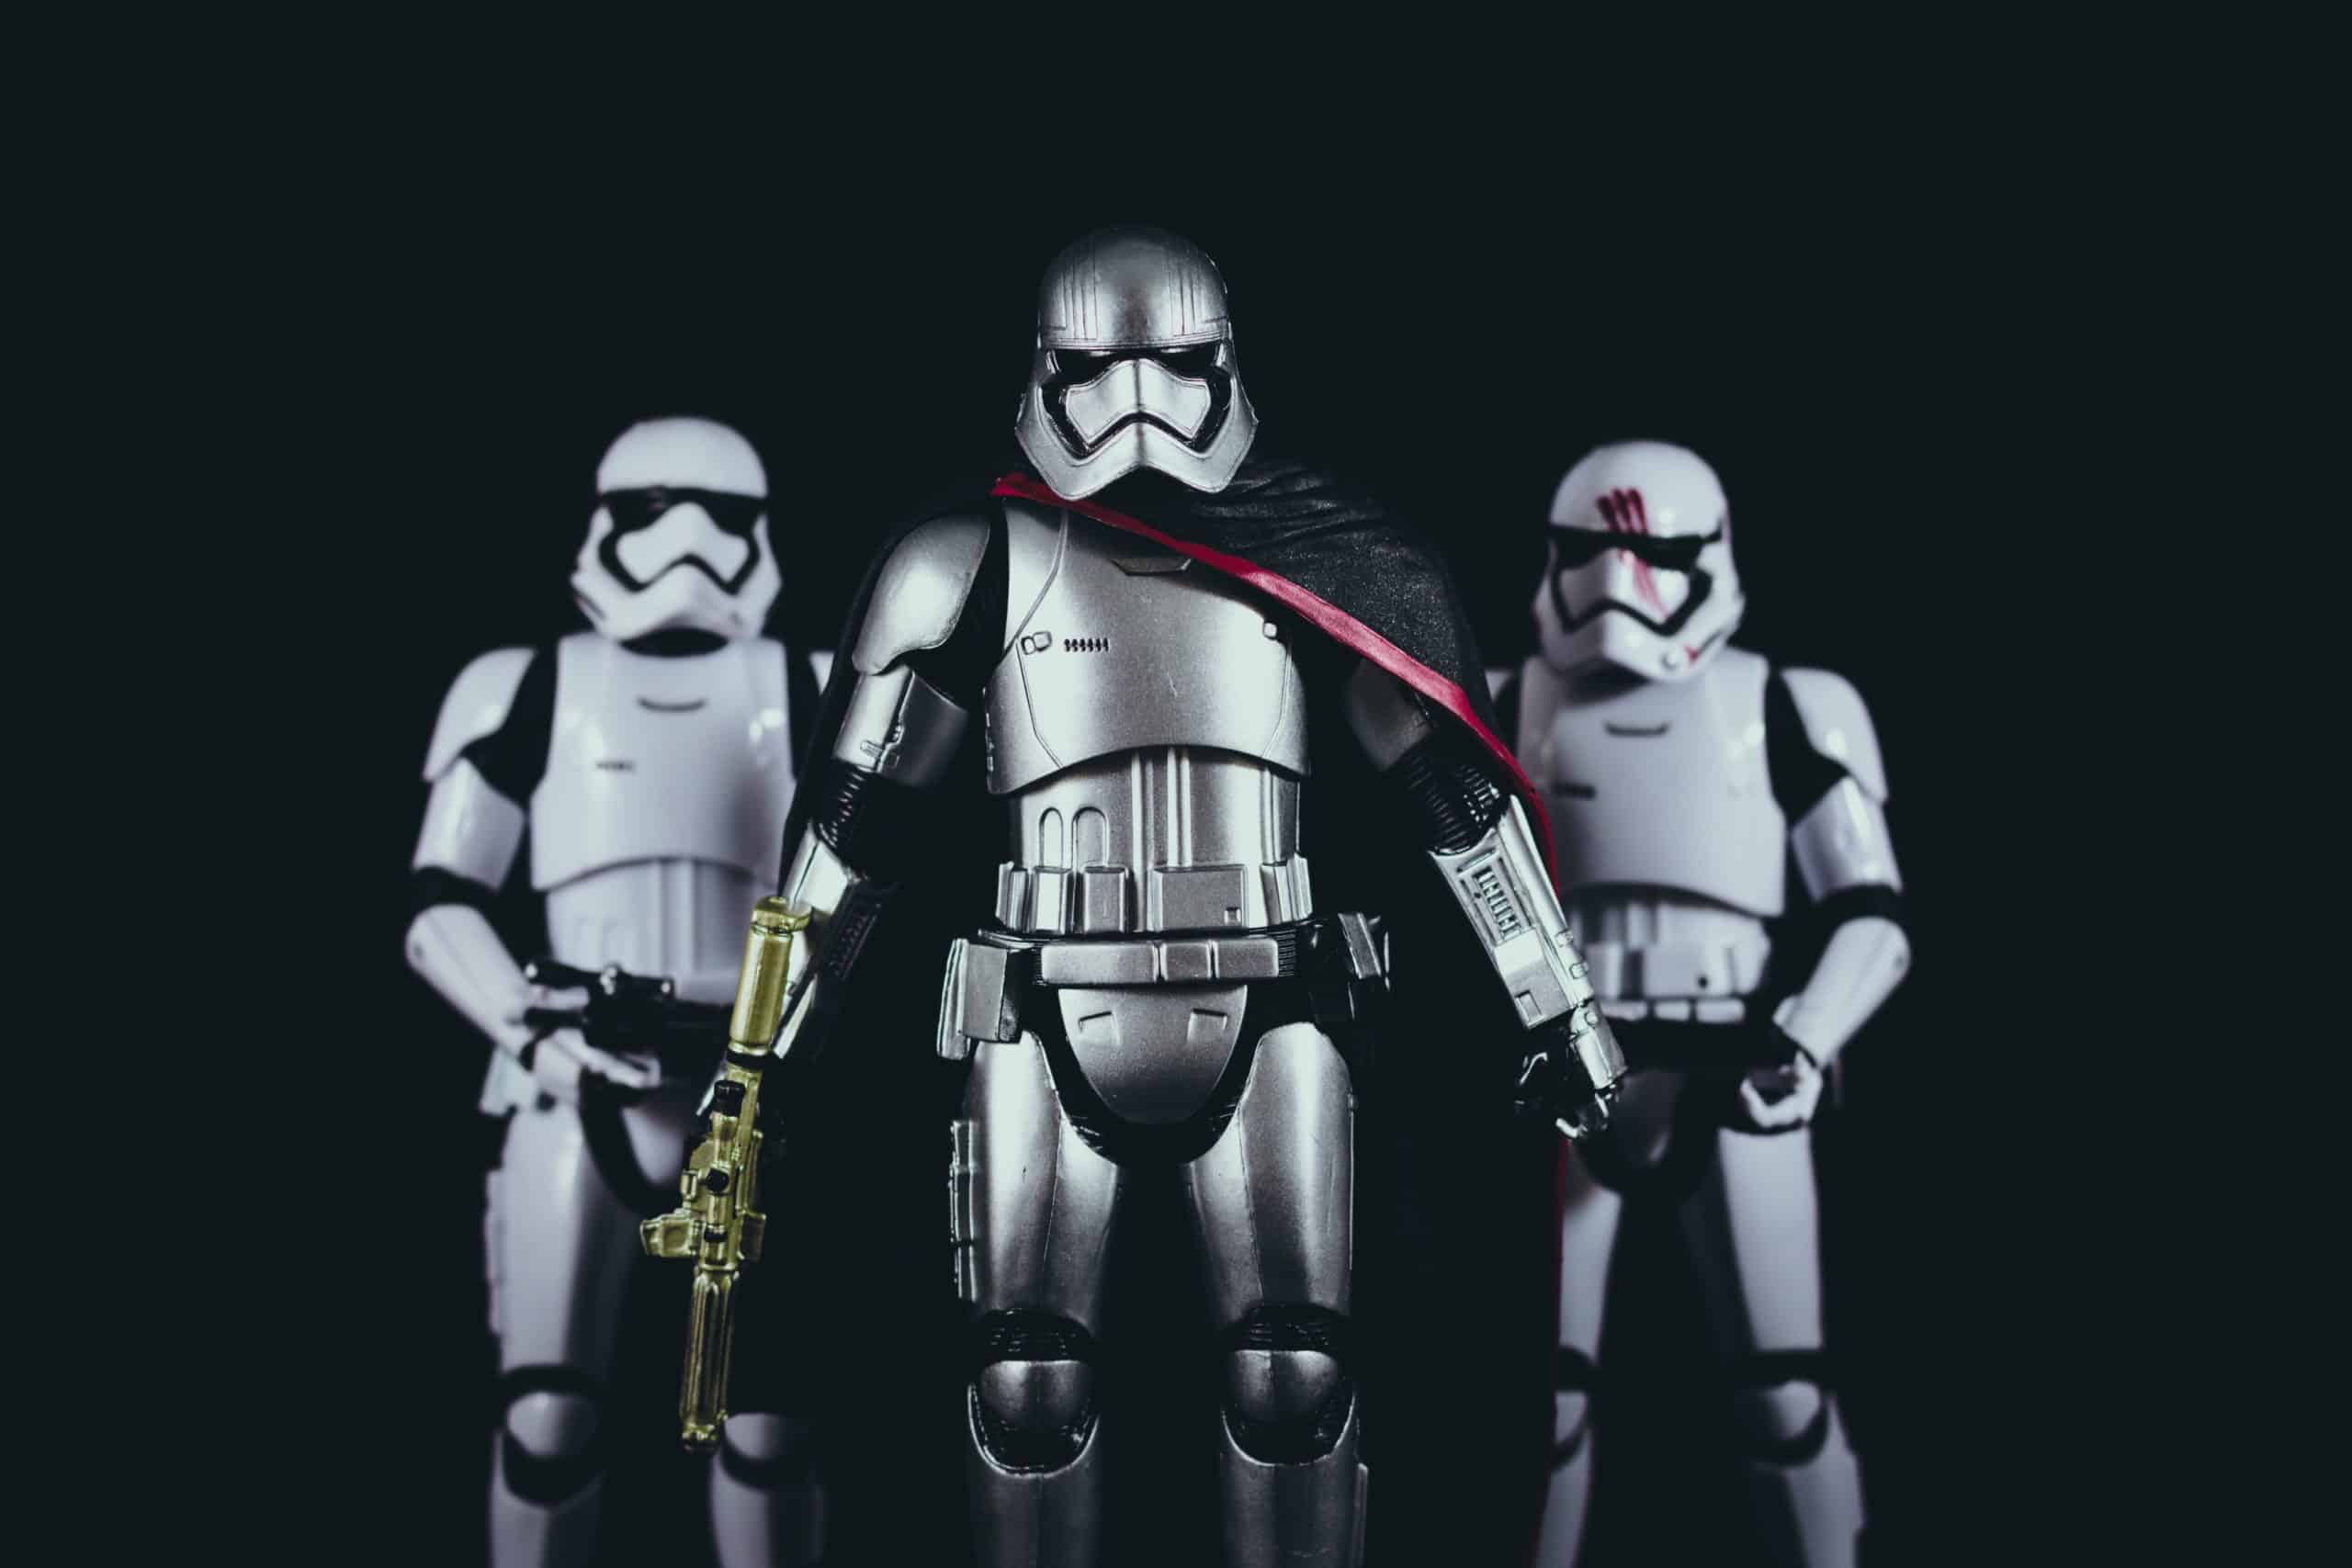 image of star wars cptain Phasma and stormtroopers